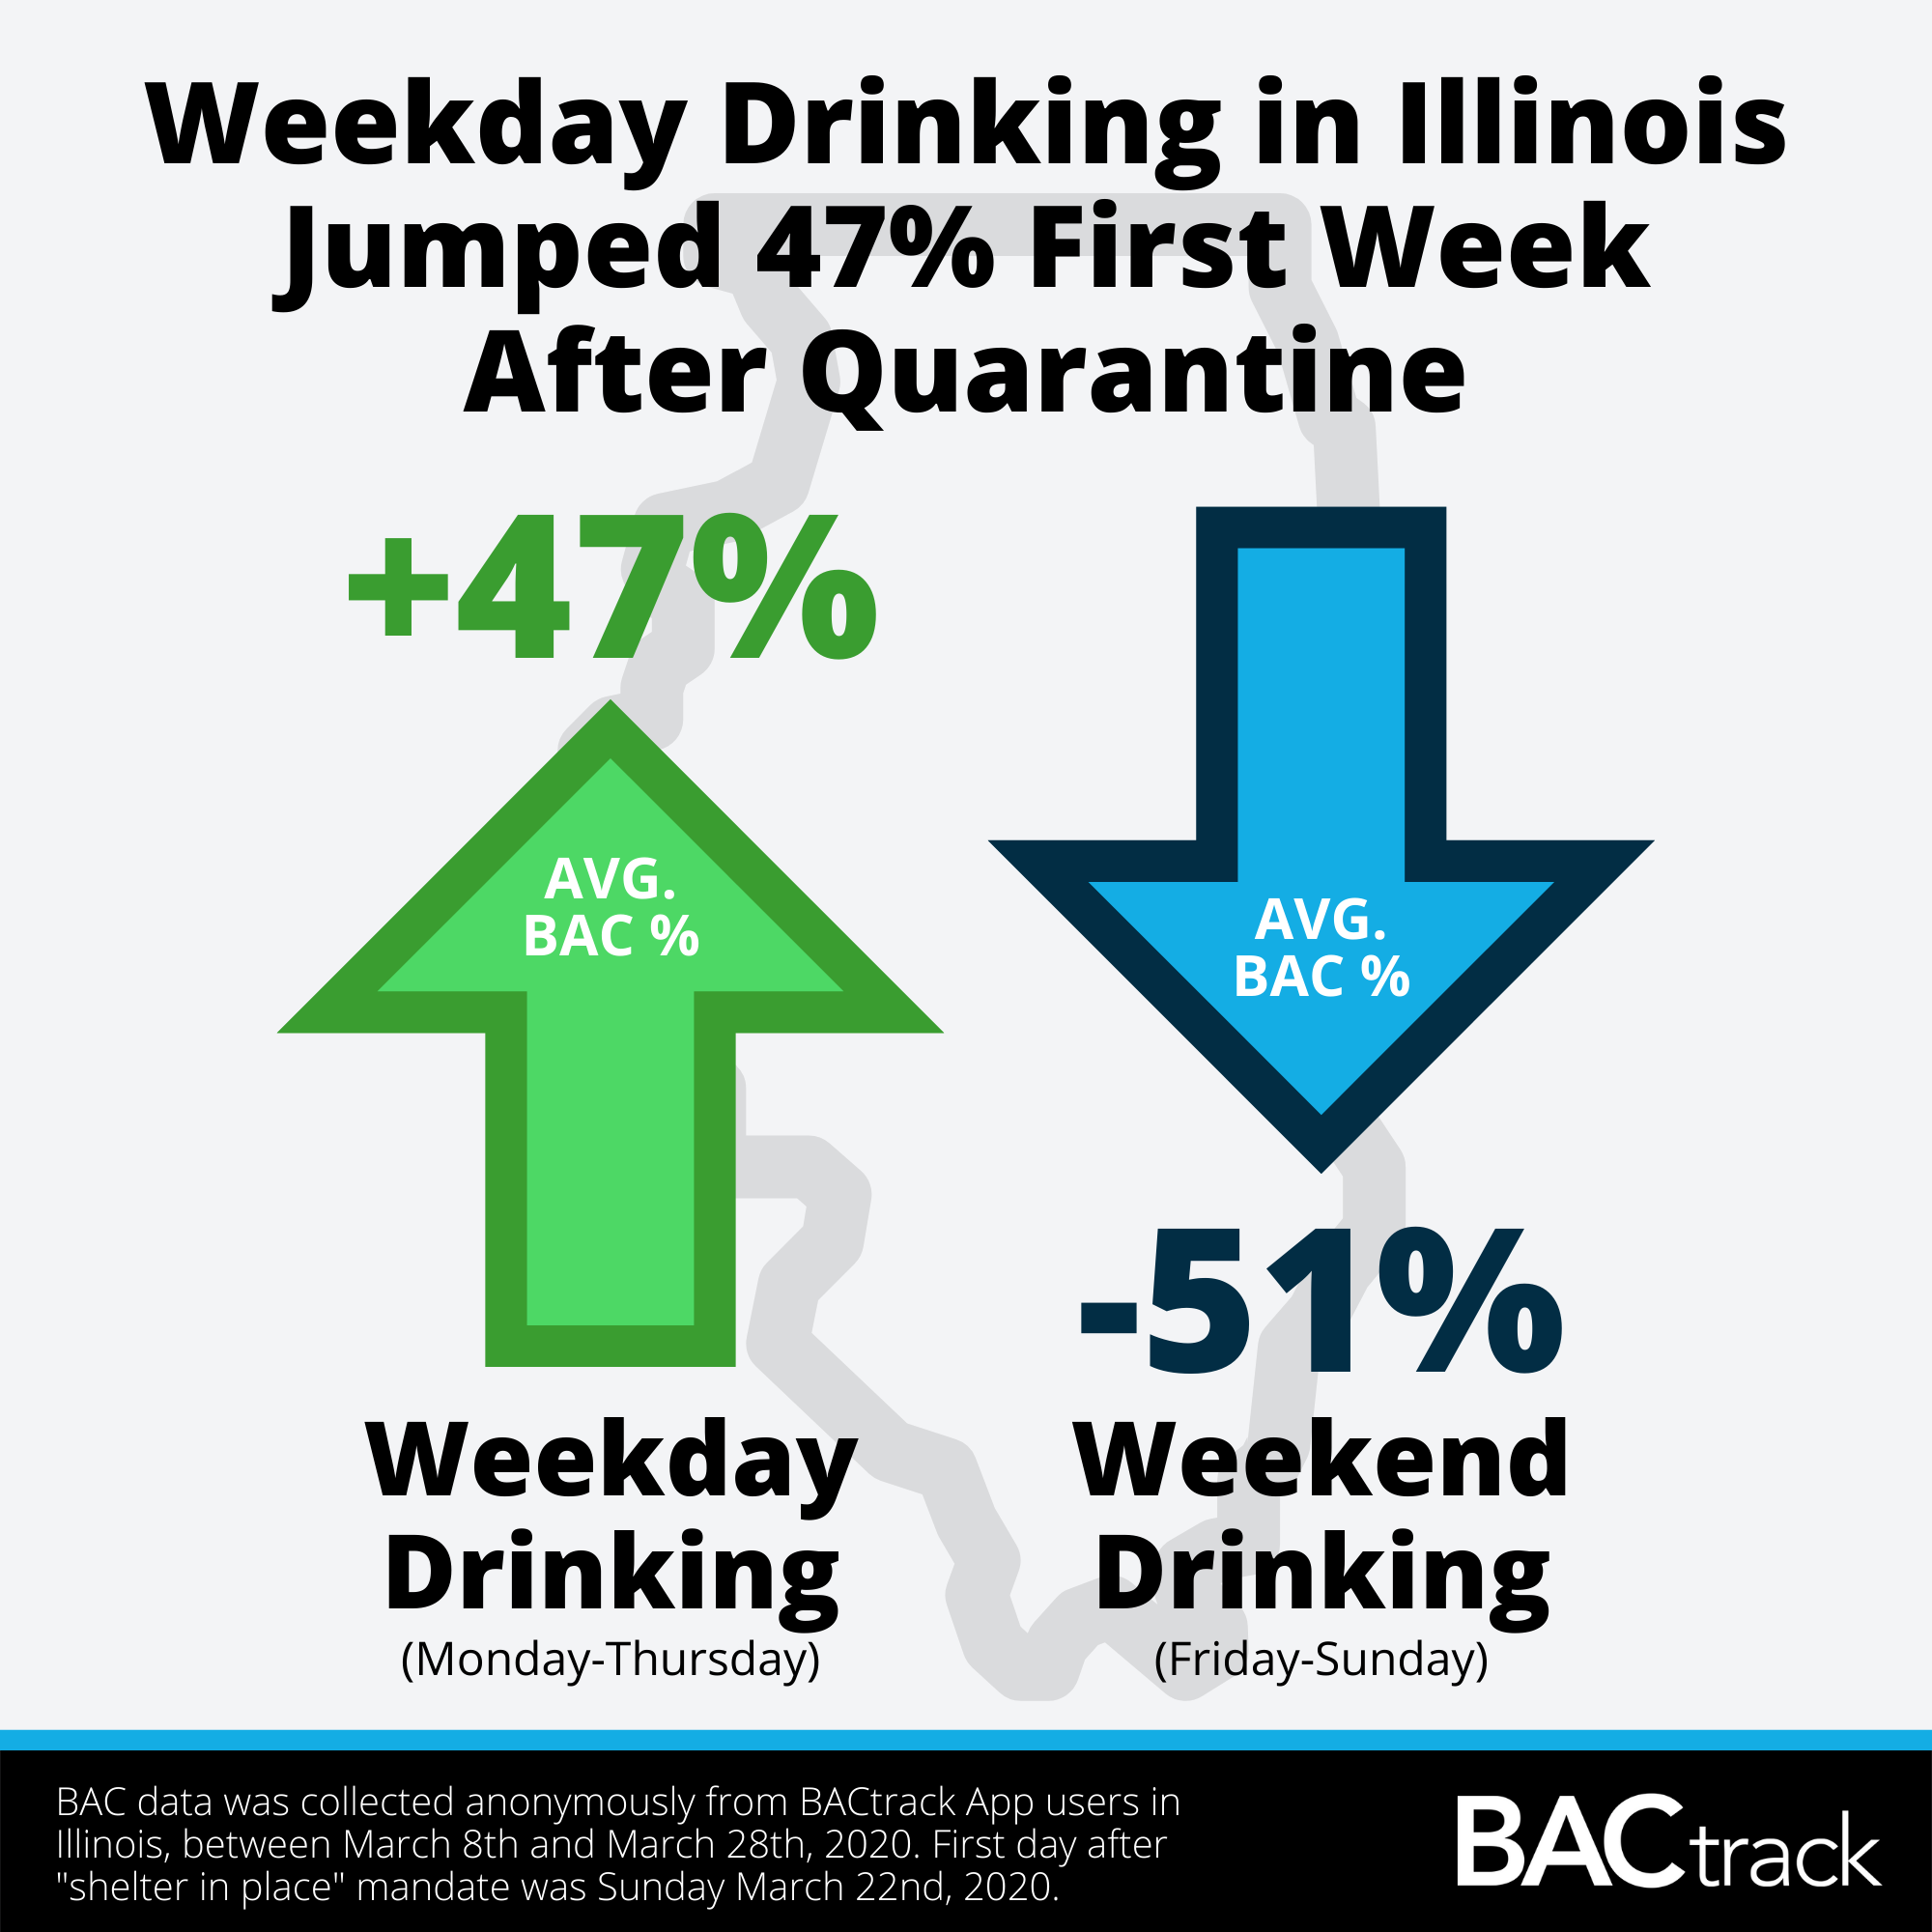 In Illinois, weekday drinking increases while weekend drinking decreases.